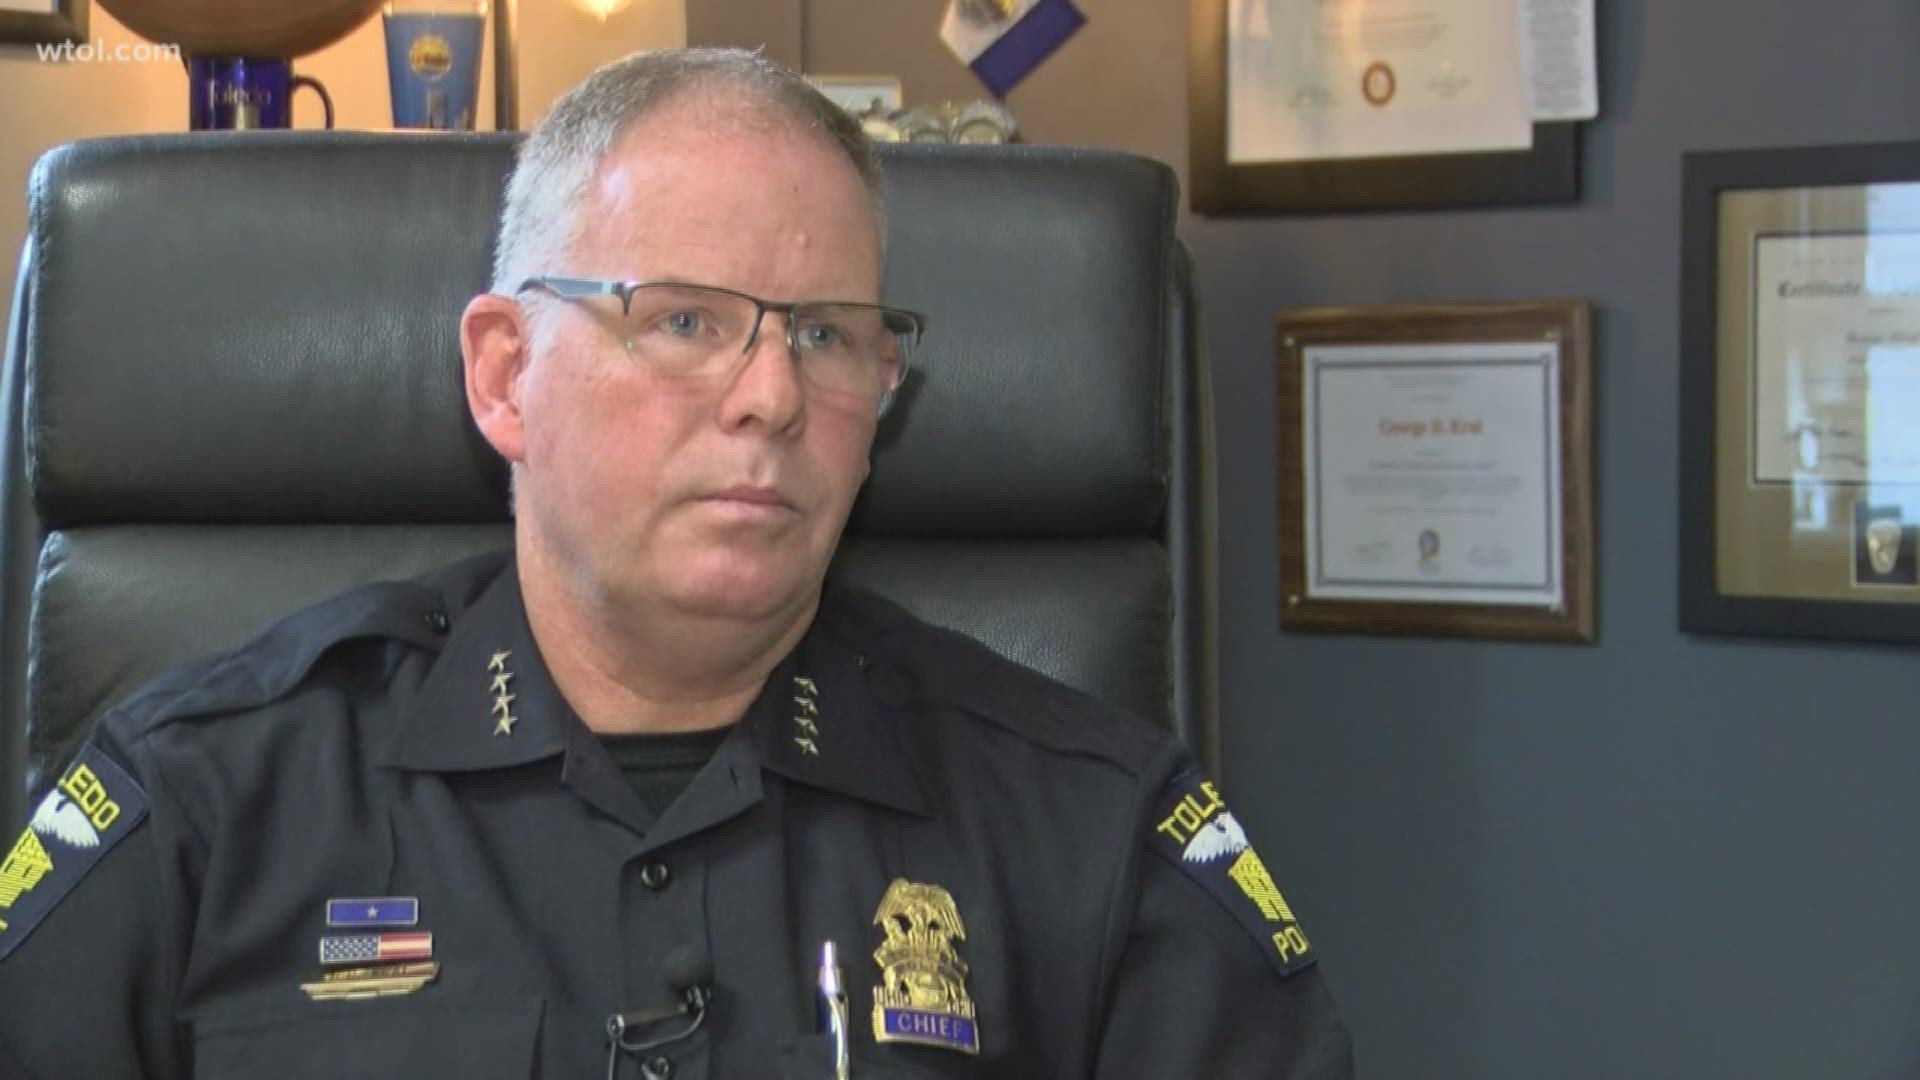 Toledo Police Chief George Kral spoke out about the viral traffic stop and discussed the officers' response, policy within the department and training.